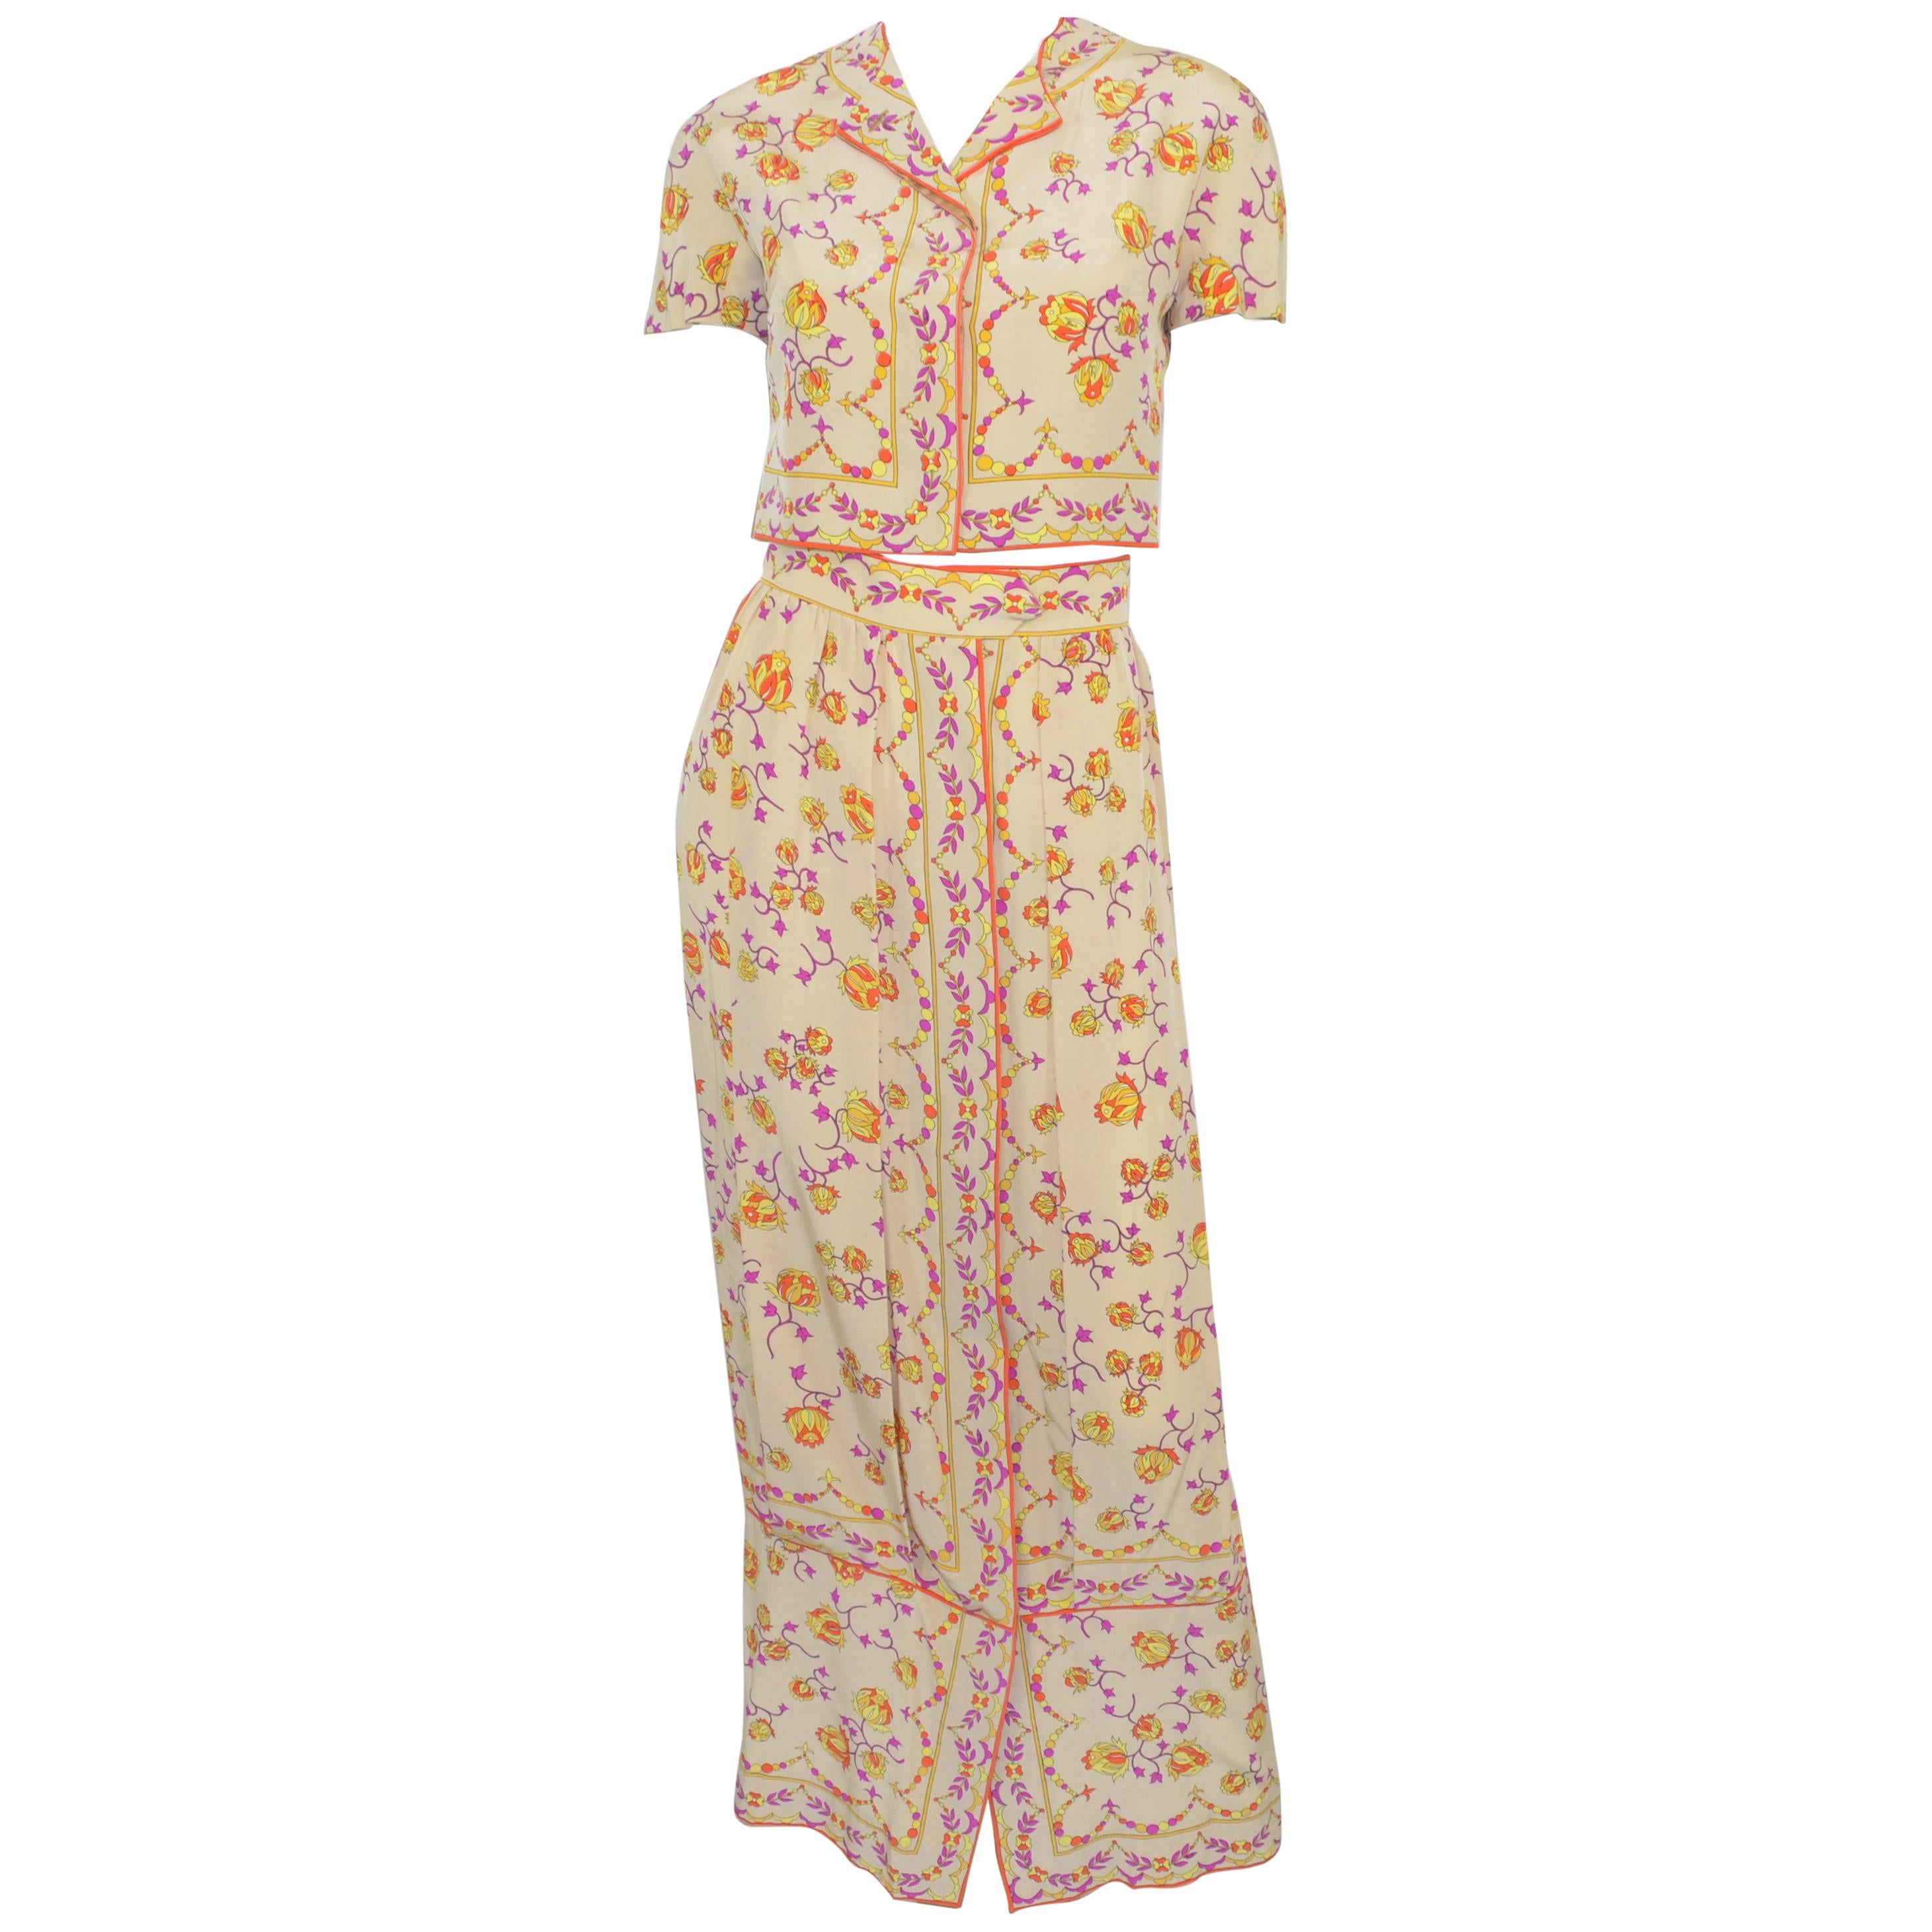 Emilio Pucci Vintage 1970's Print Cropped Top and Maxi Skirt Set